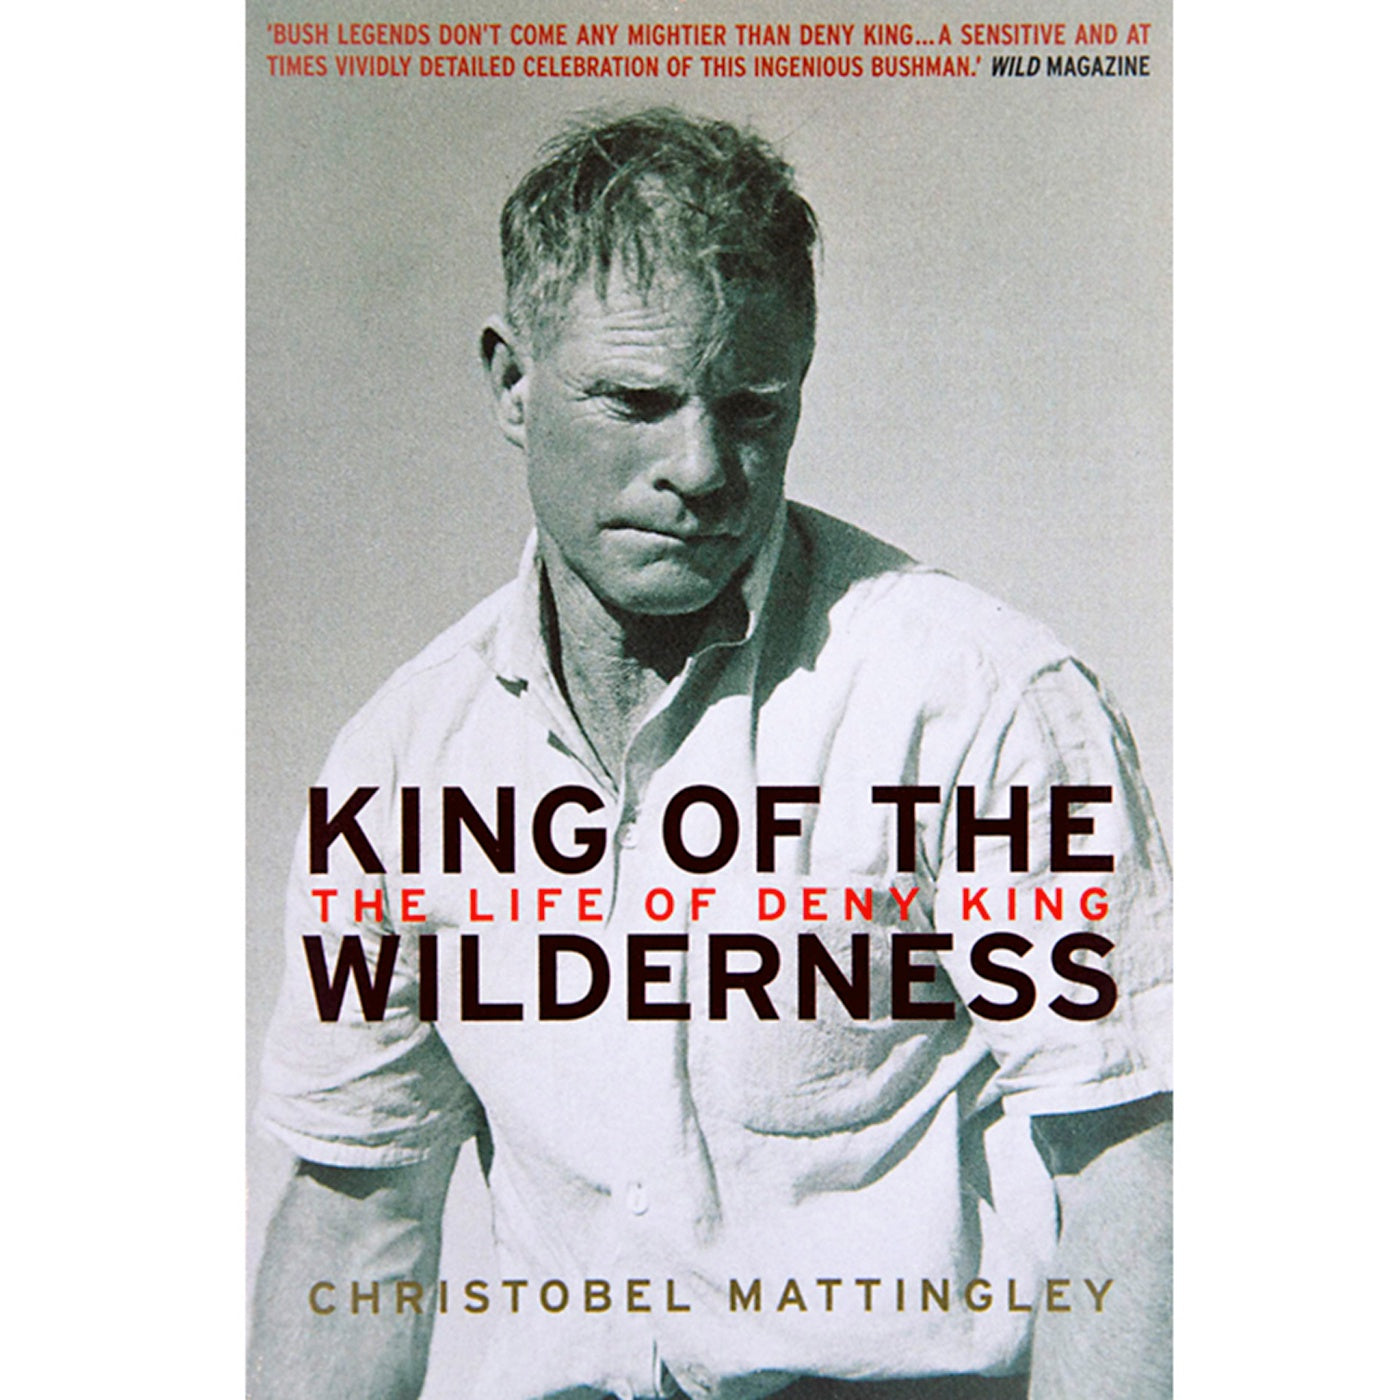 King Of The Wilderness: The Life Of Deny King